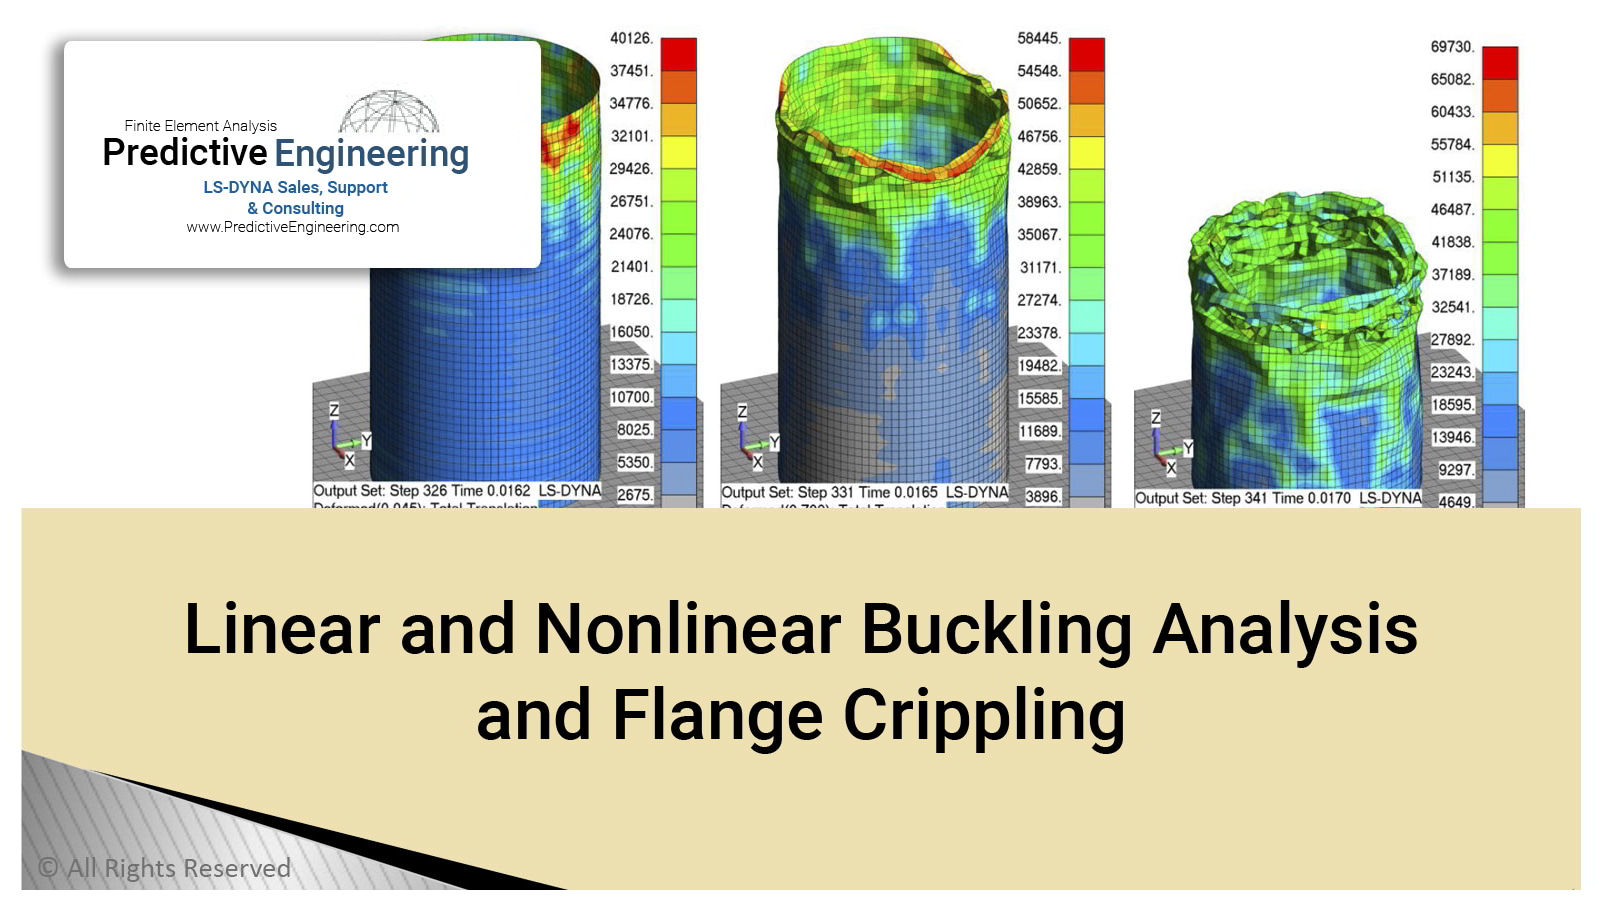 Linear and Nonlinear Buckling Analysis and Flange Crippling